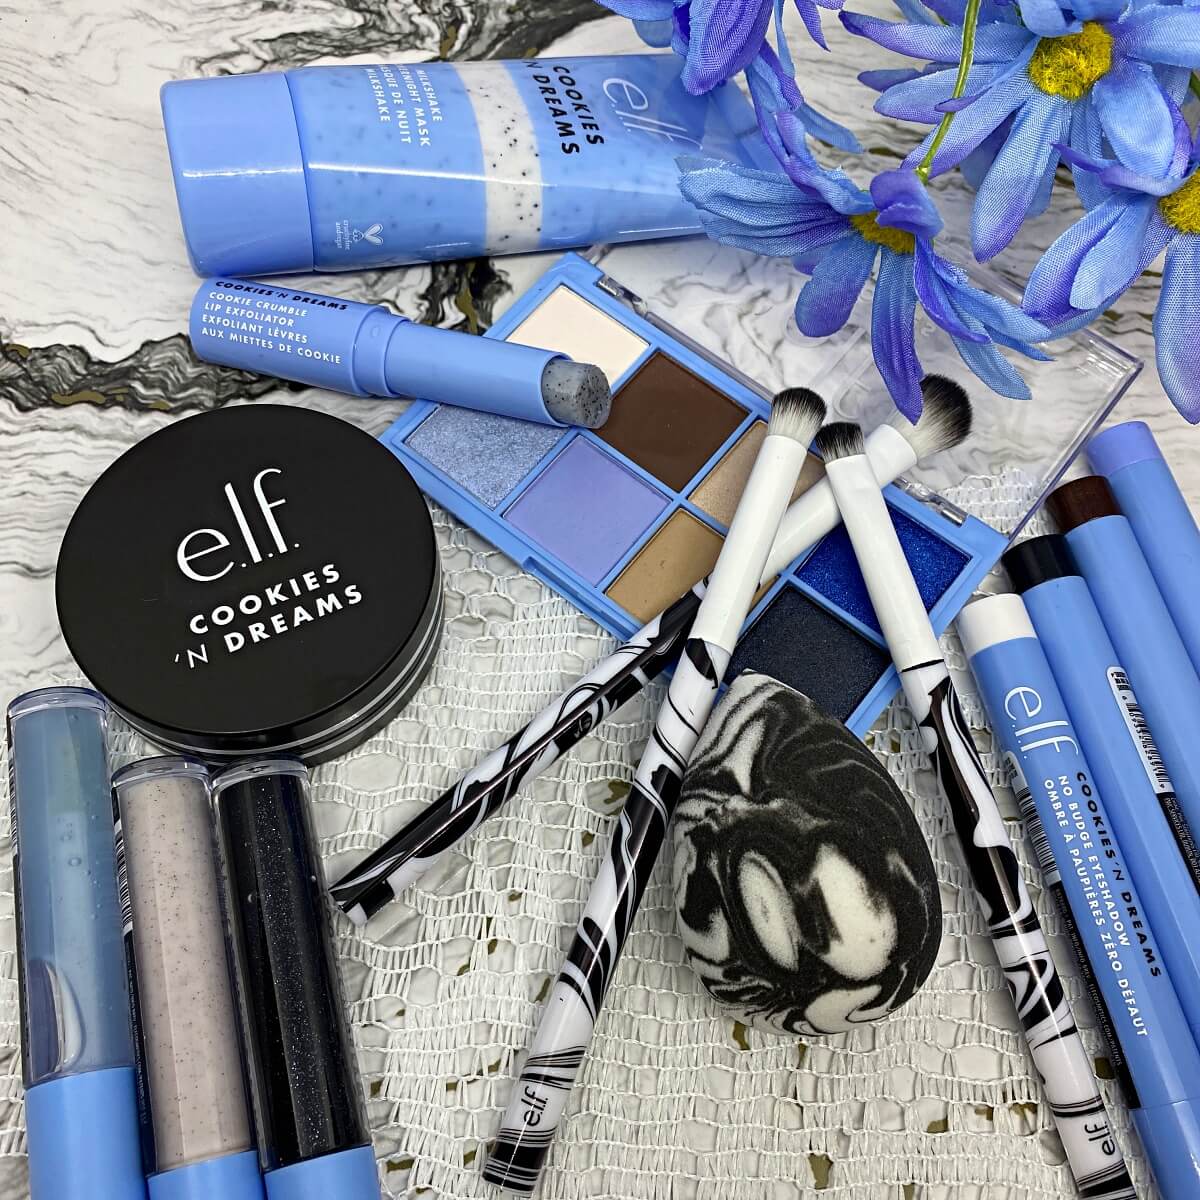 elf Cookies 'n Dreams collection Review